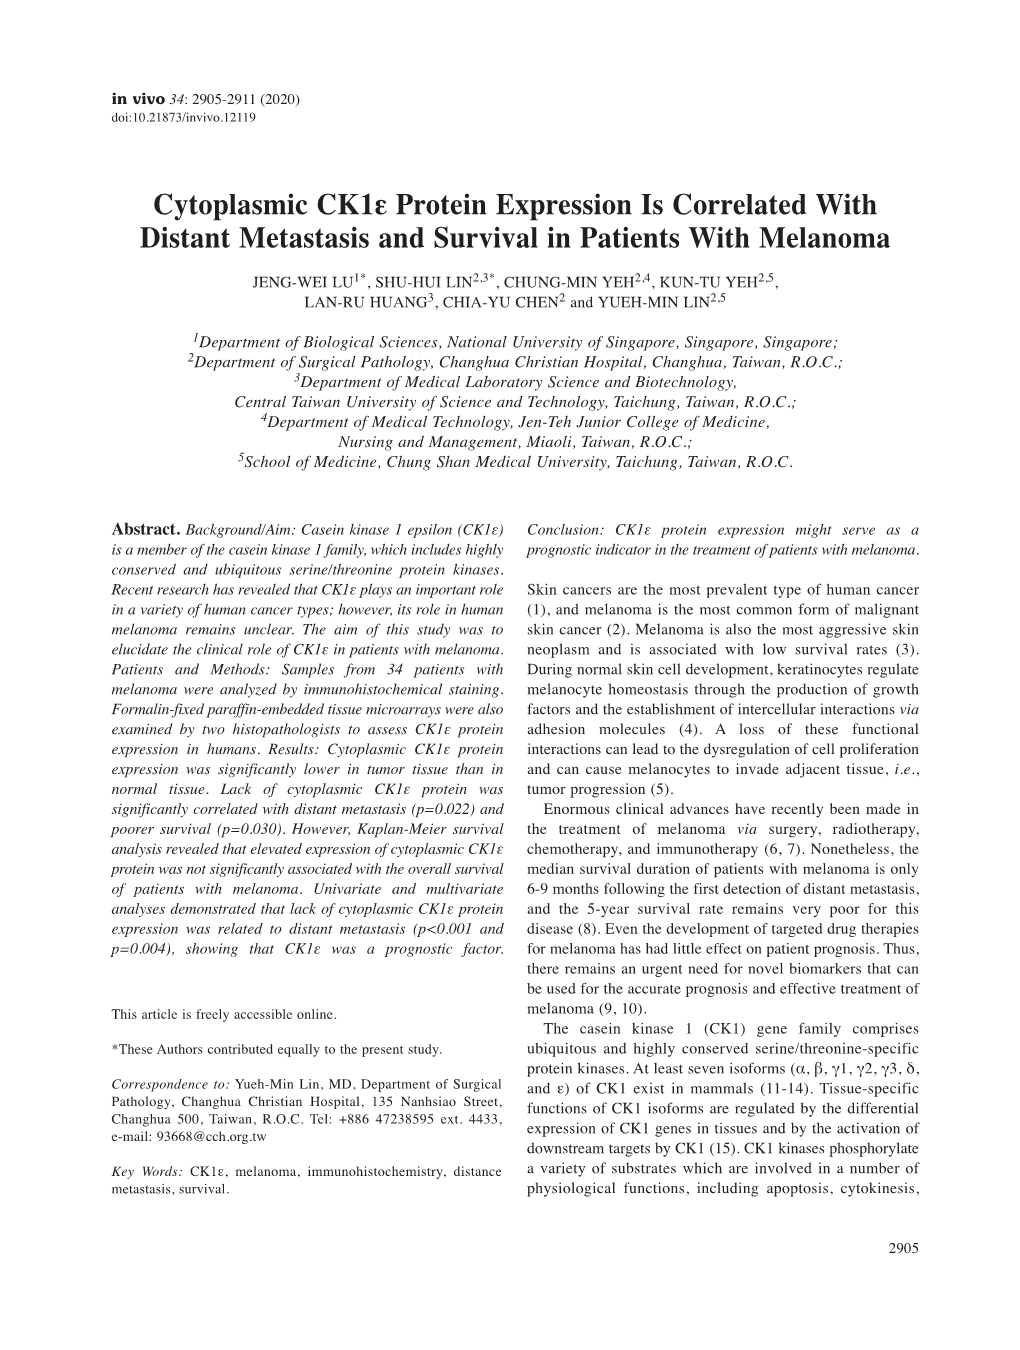 Cytoplasmic Ck1ε Protein Expression Is Correlated with Distant